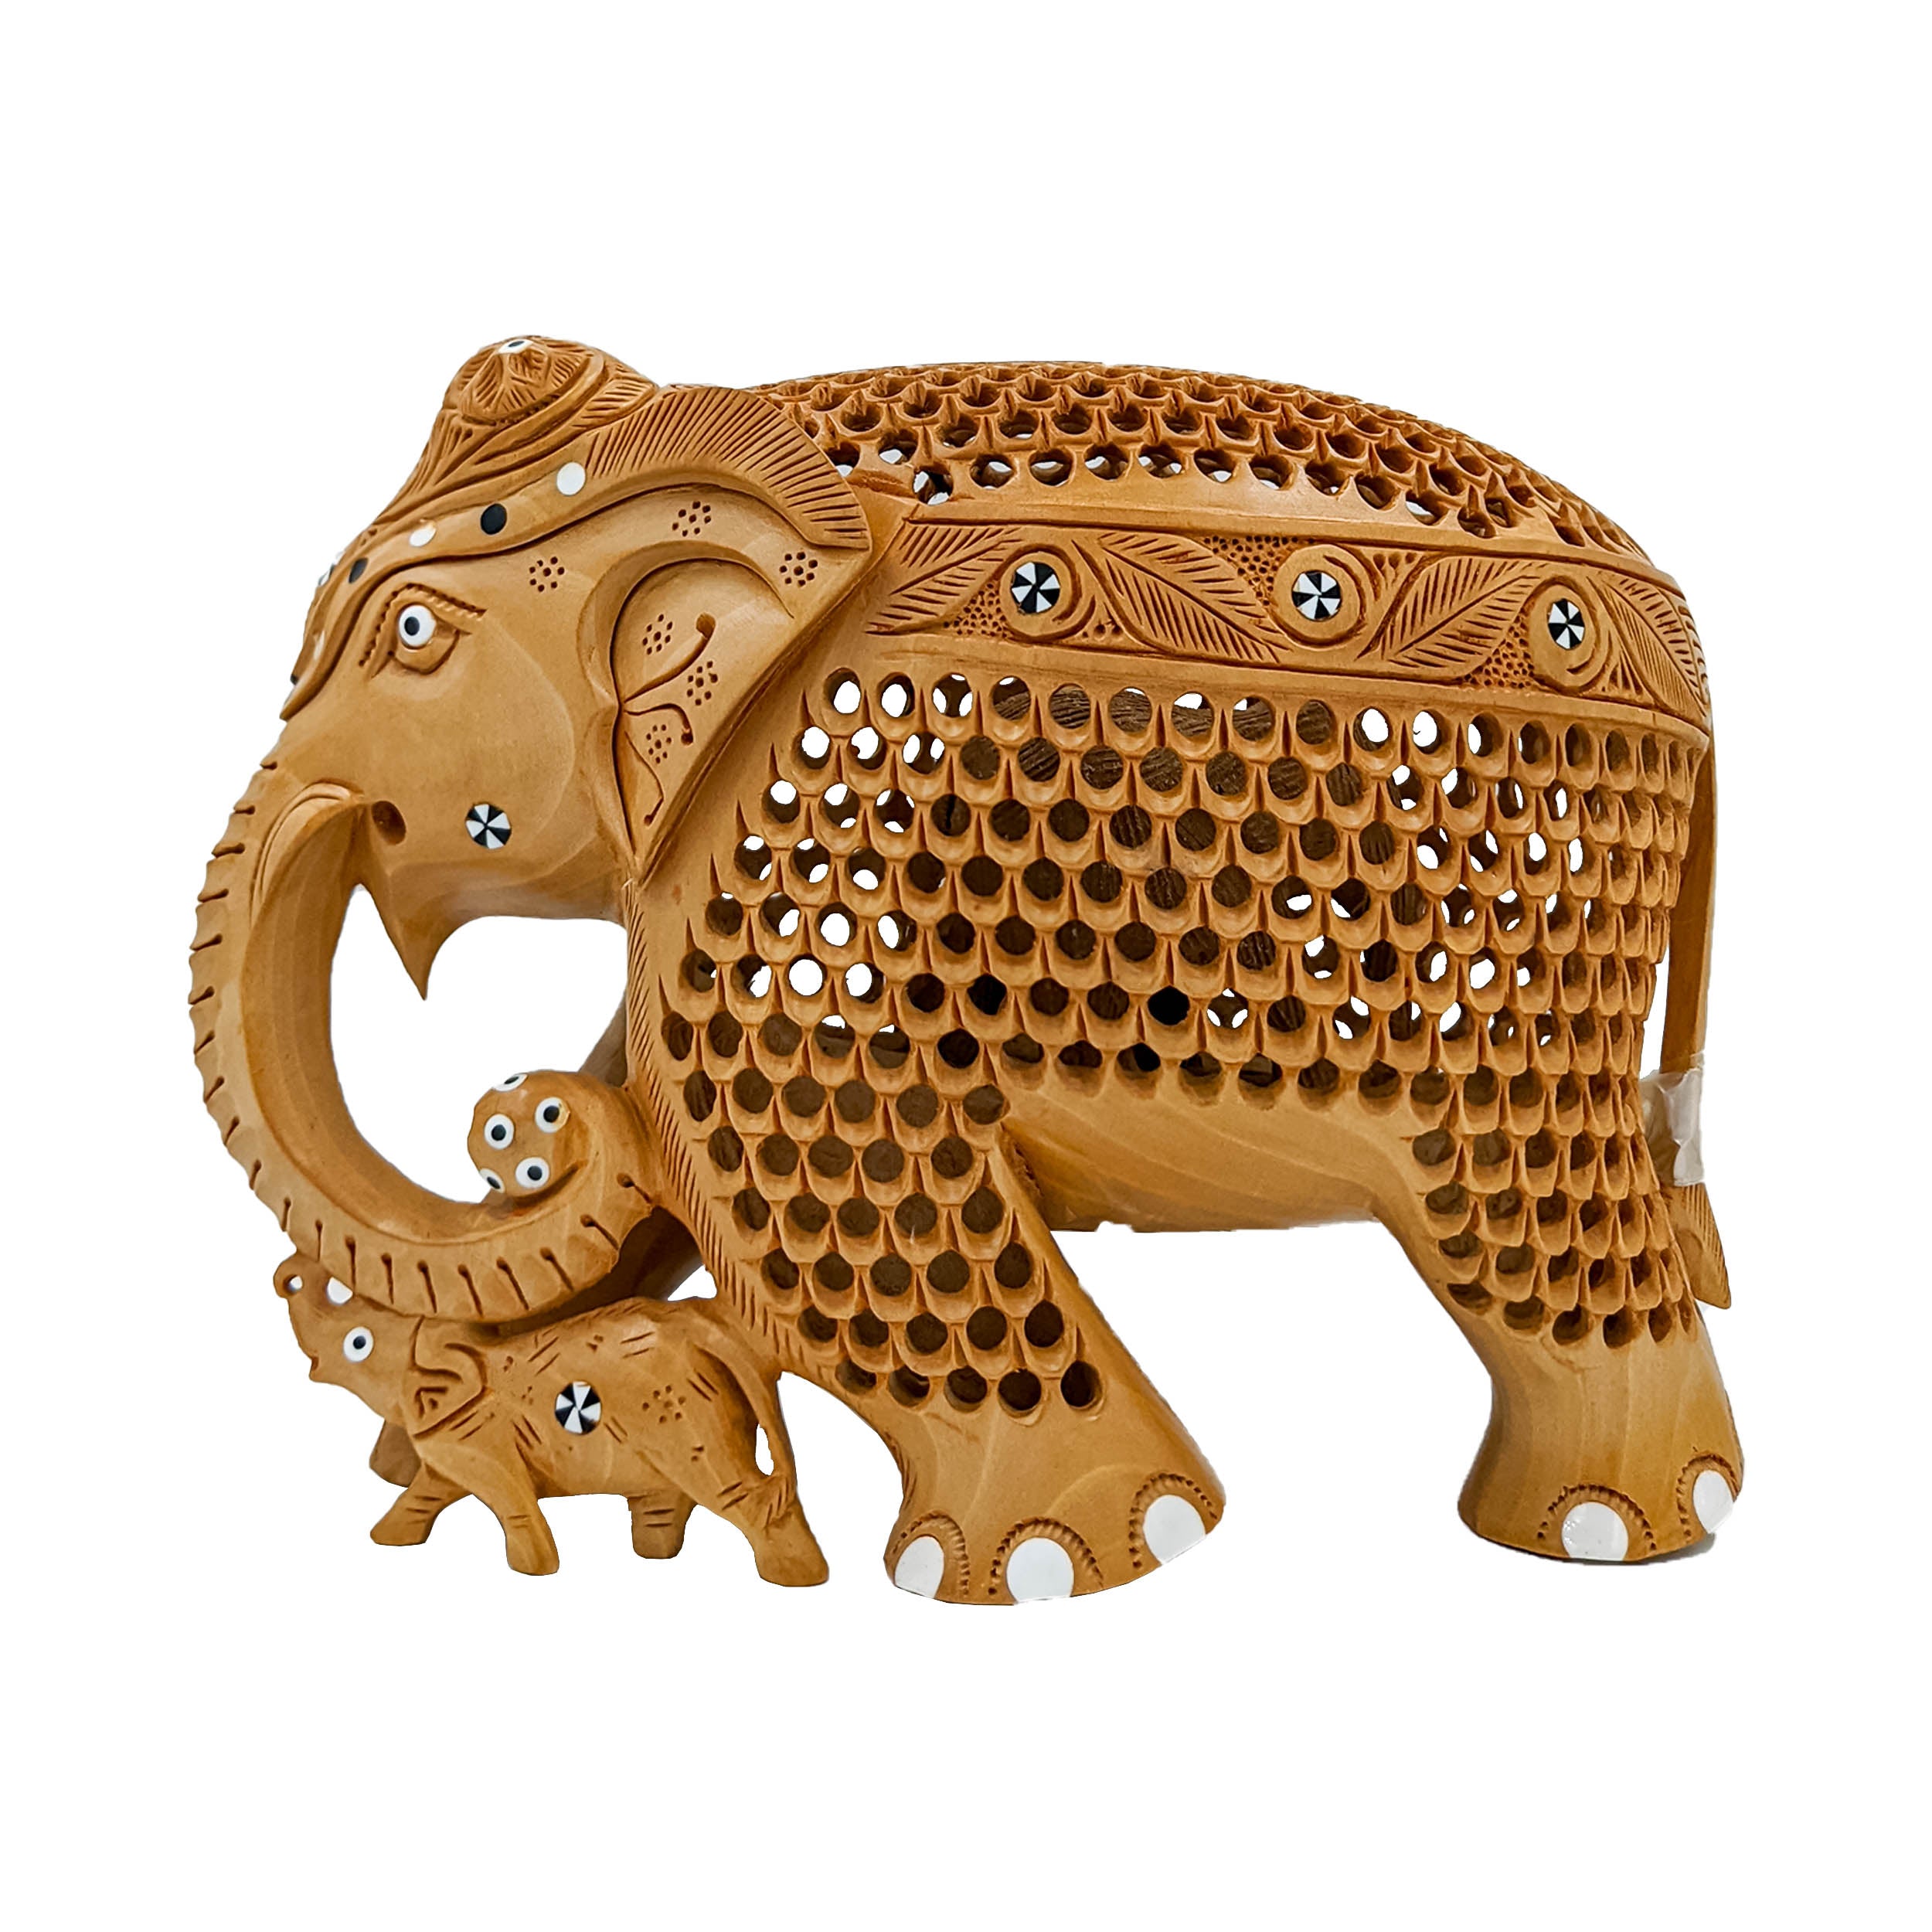 Wooden Handcrafted Trunk Baby Elephant Statue